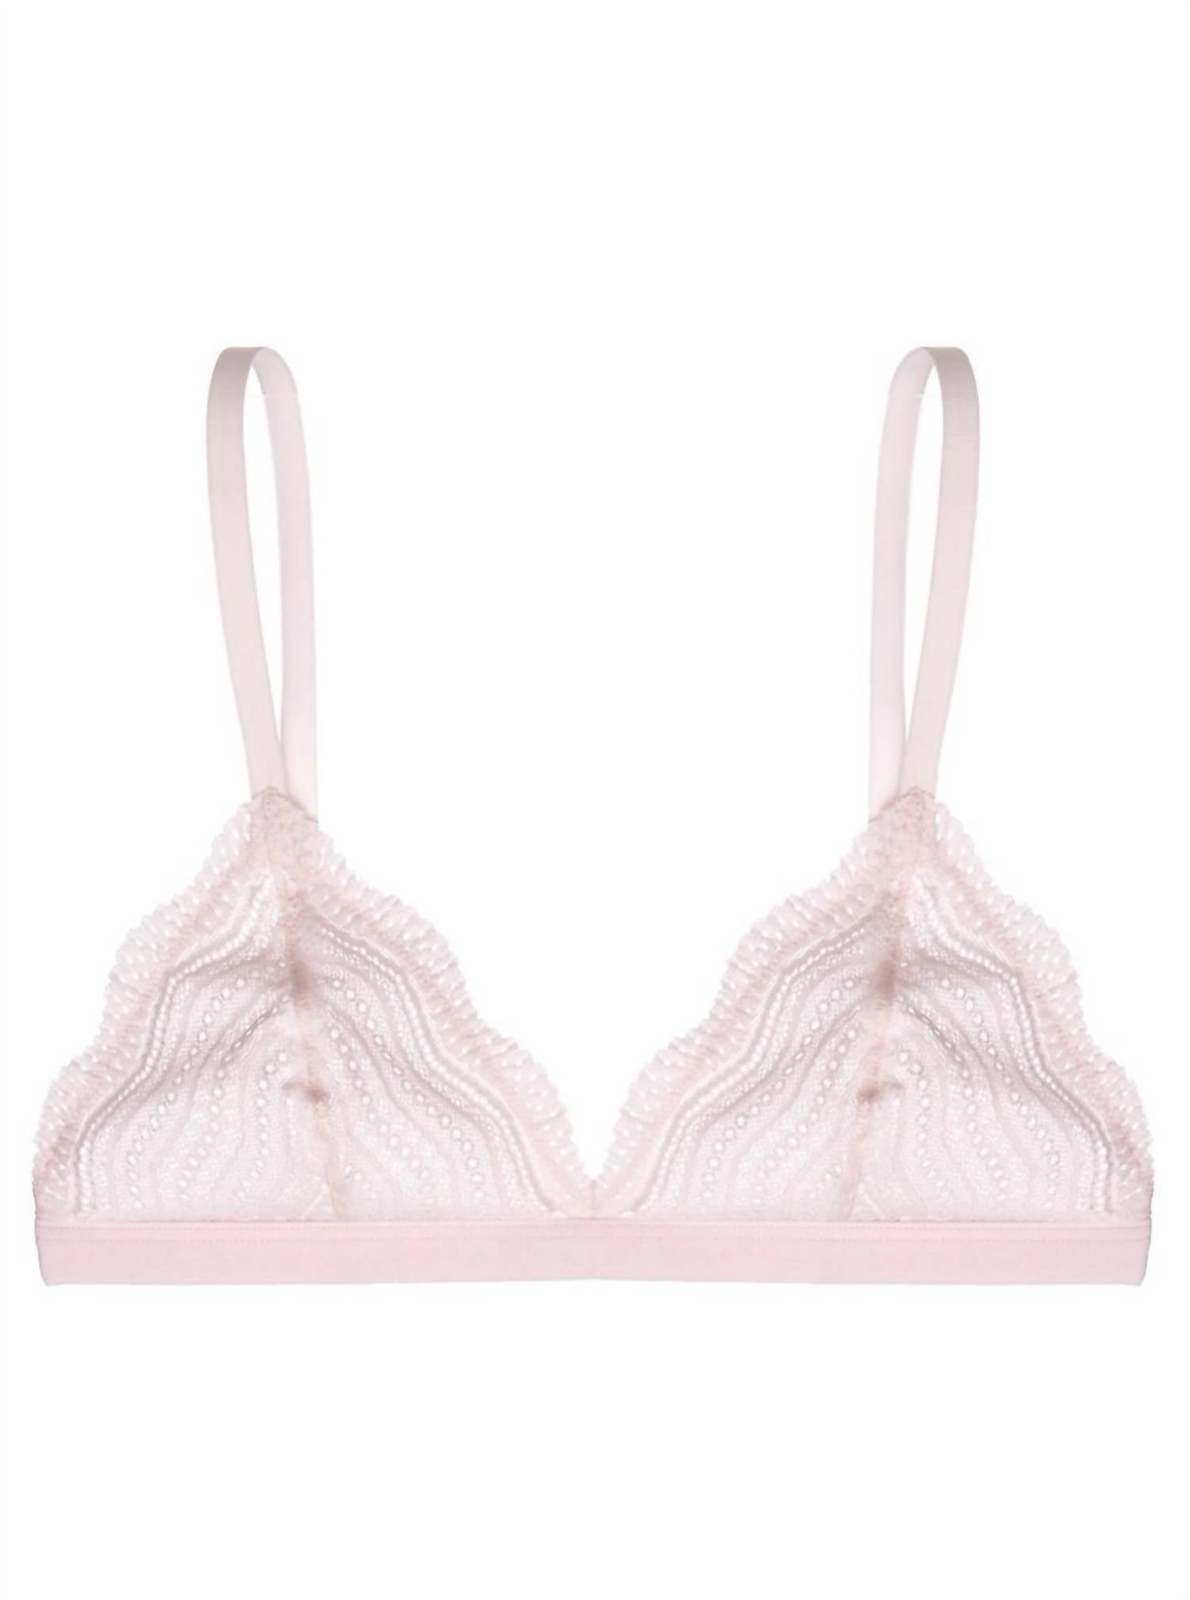 Primary image for Women's Dolce Bralette